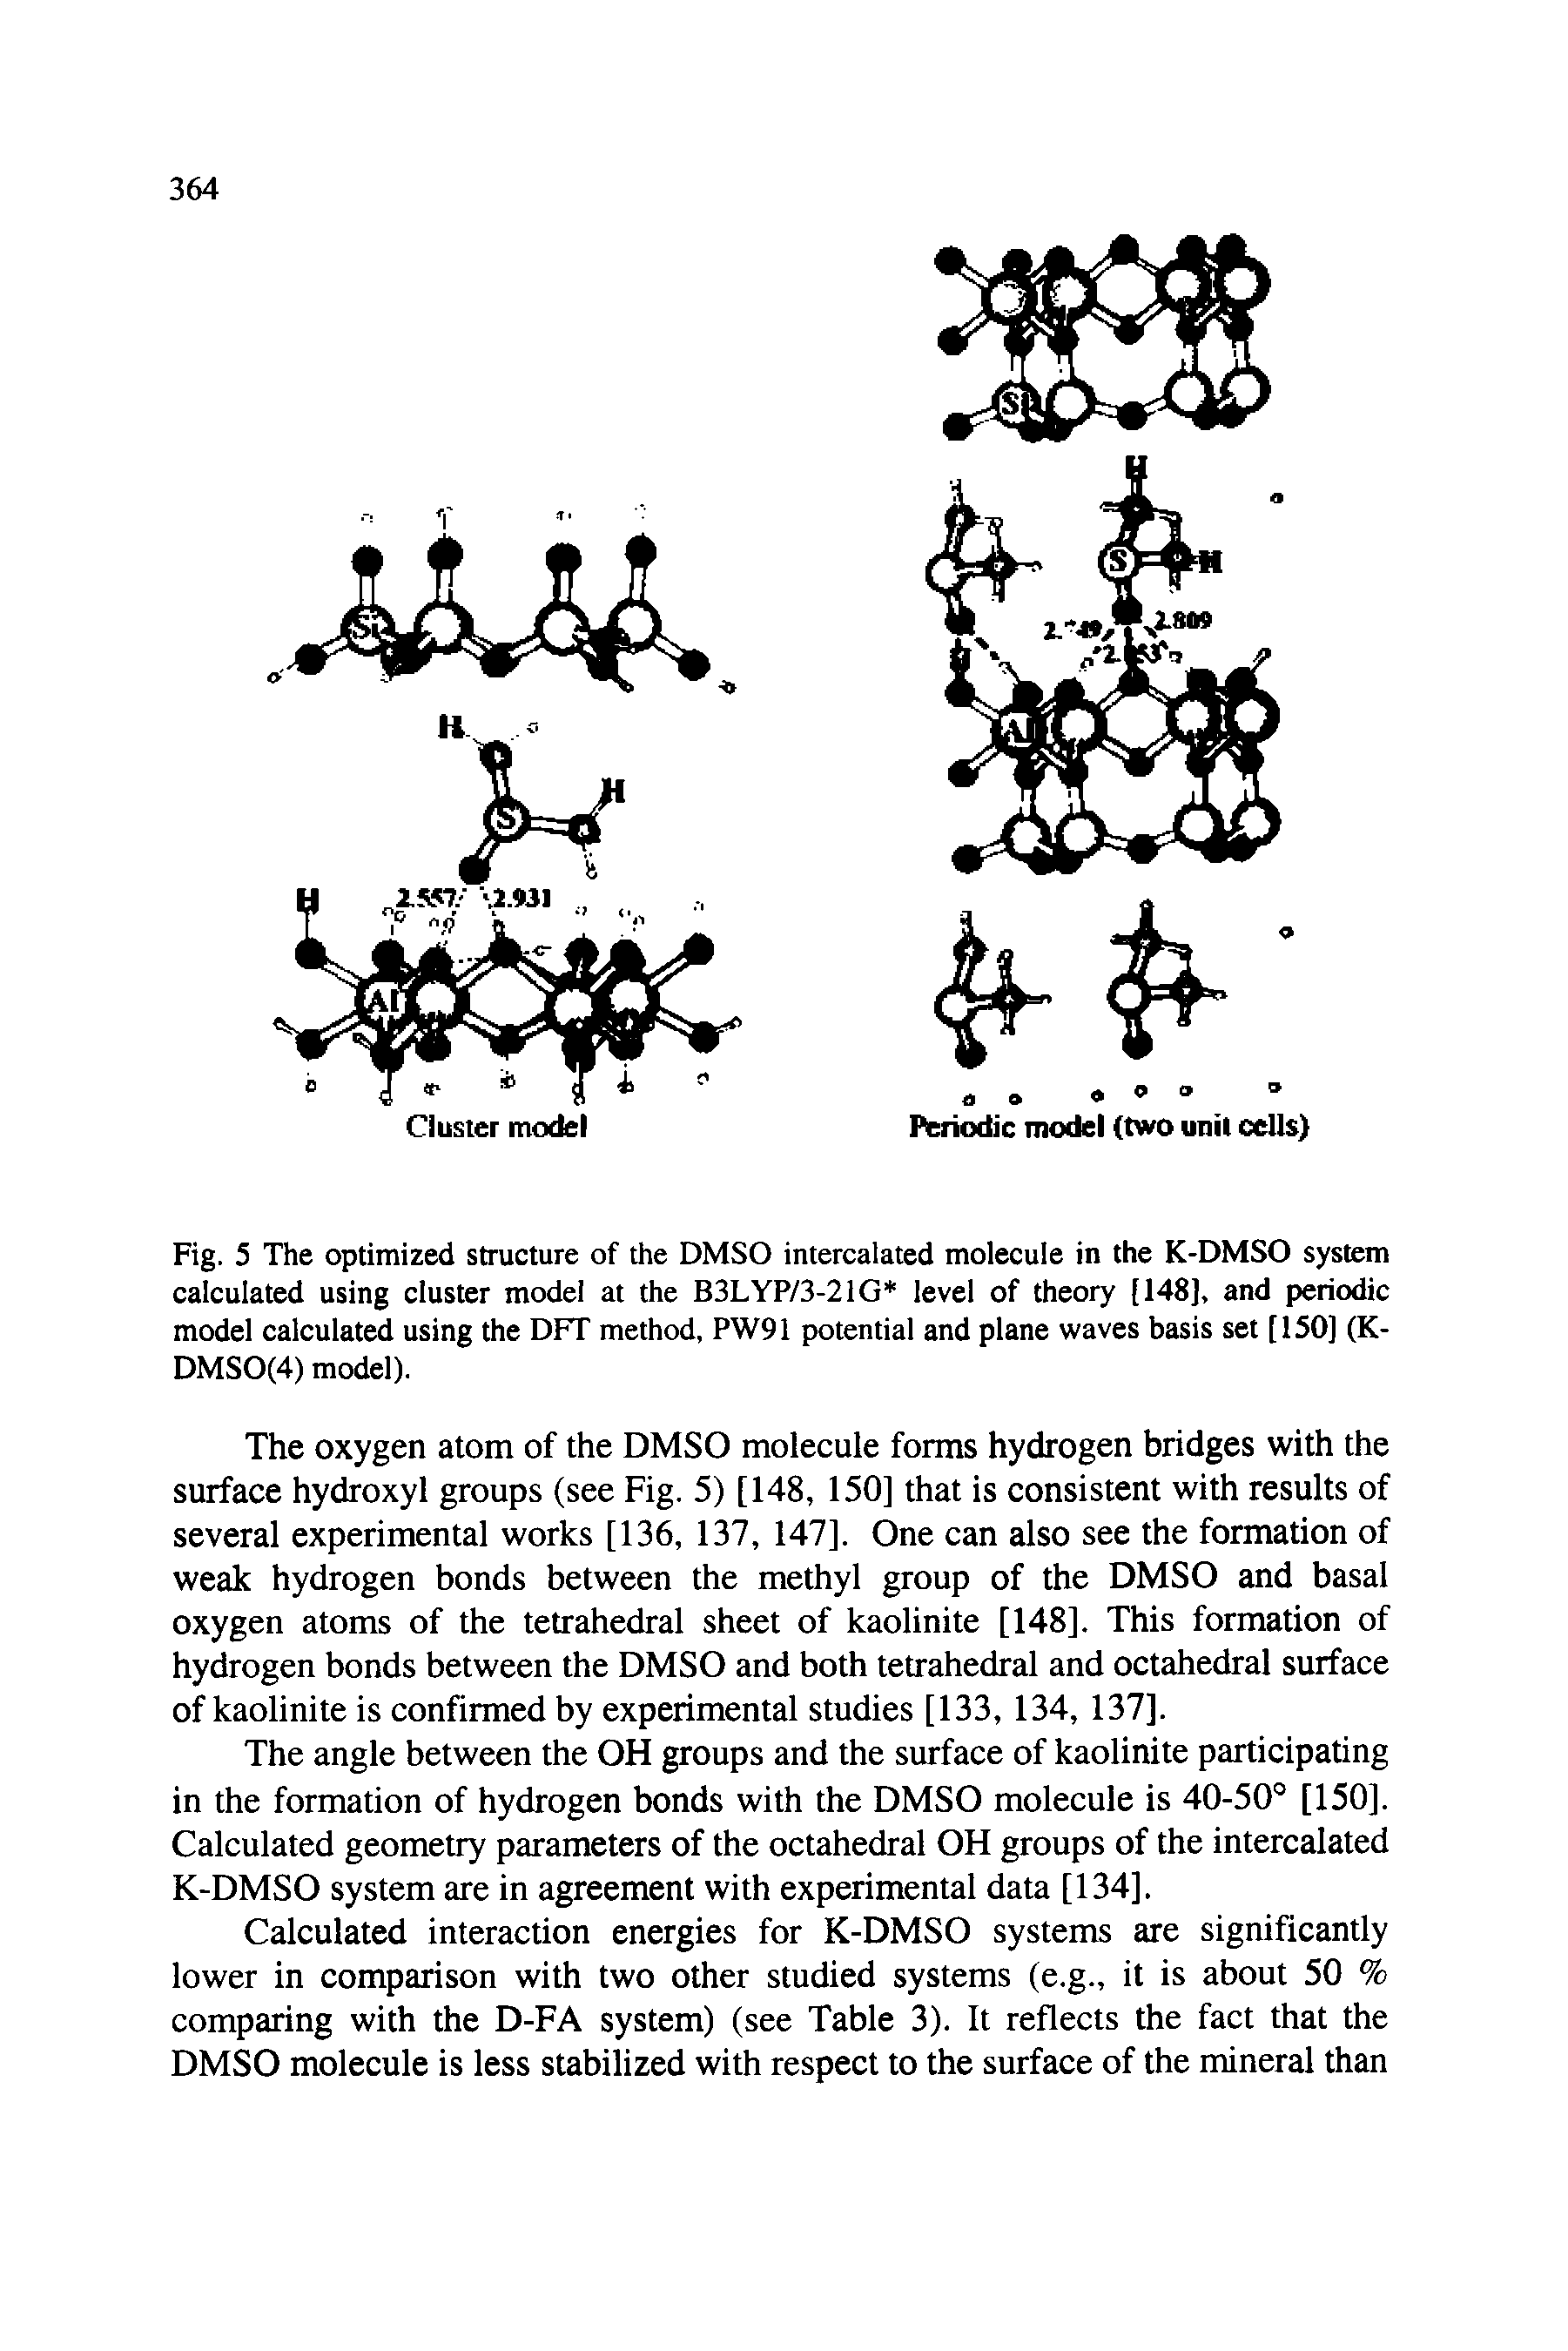 Fig. 5 The optimized structure of the DMSO intercalated molecule in the K-DMSO system calculated using cluster model at the B3LYP/3-21G level of theory [148], and periodic model calculated using the DFT method, PW91 potential and plane waves basis set [150] (K-DMSO(4) model).